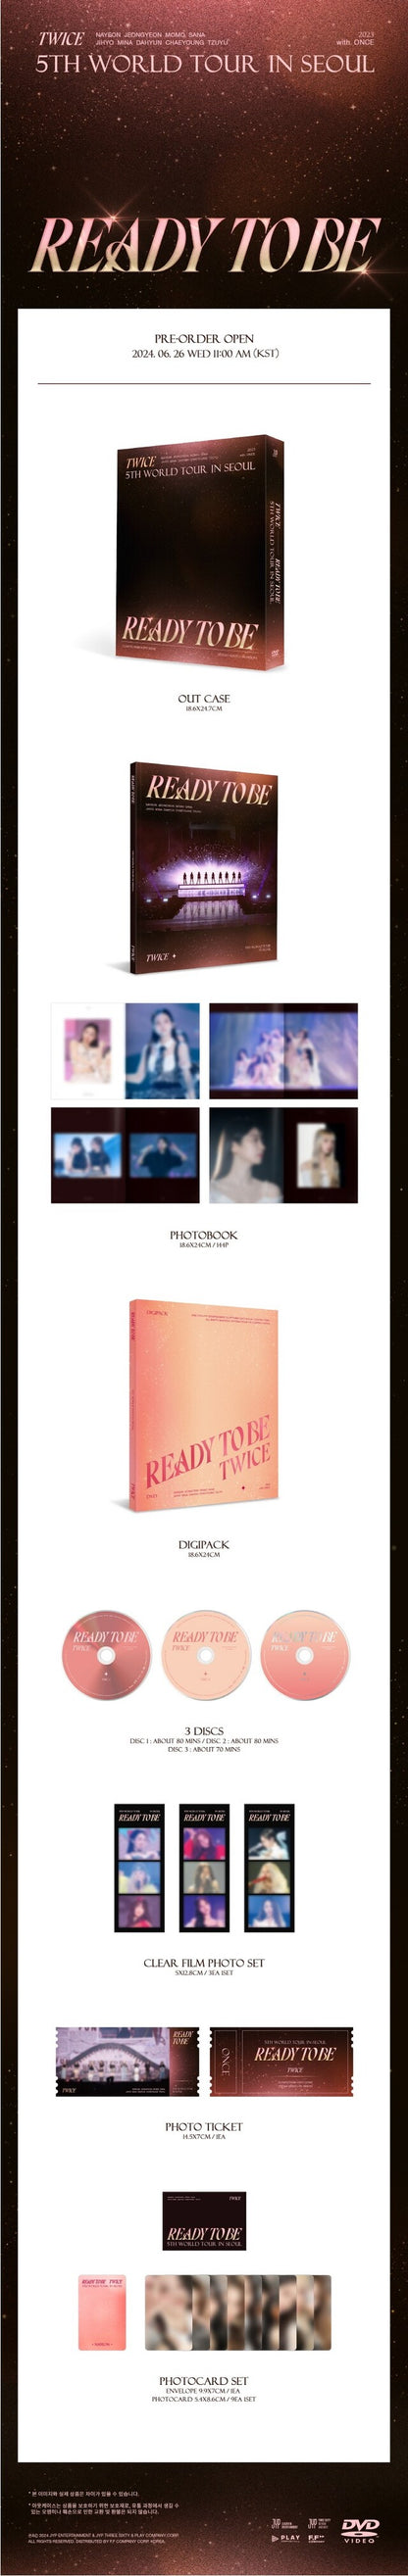 [PREORDER] TWICE - 5TH WORLD TOUR READY TO BE IN SEOUL DVD